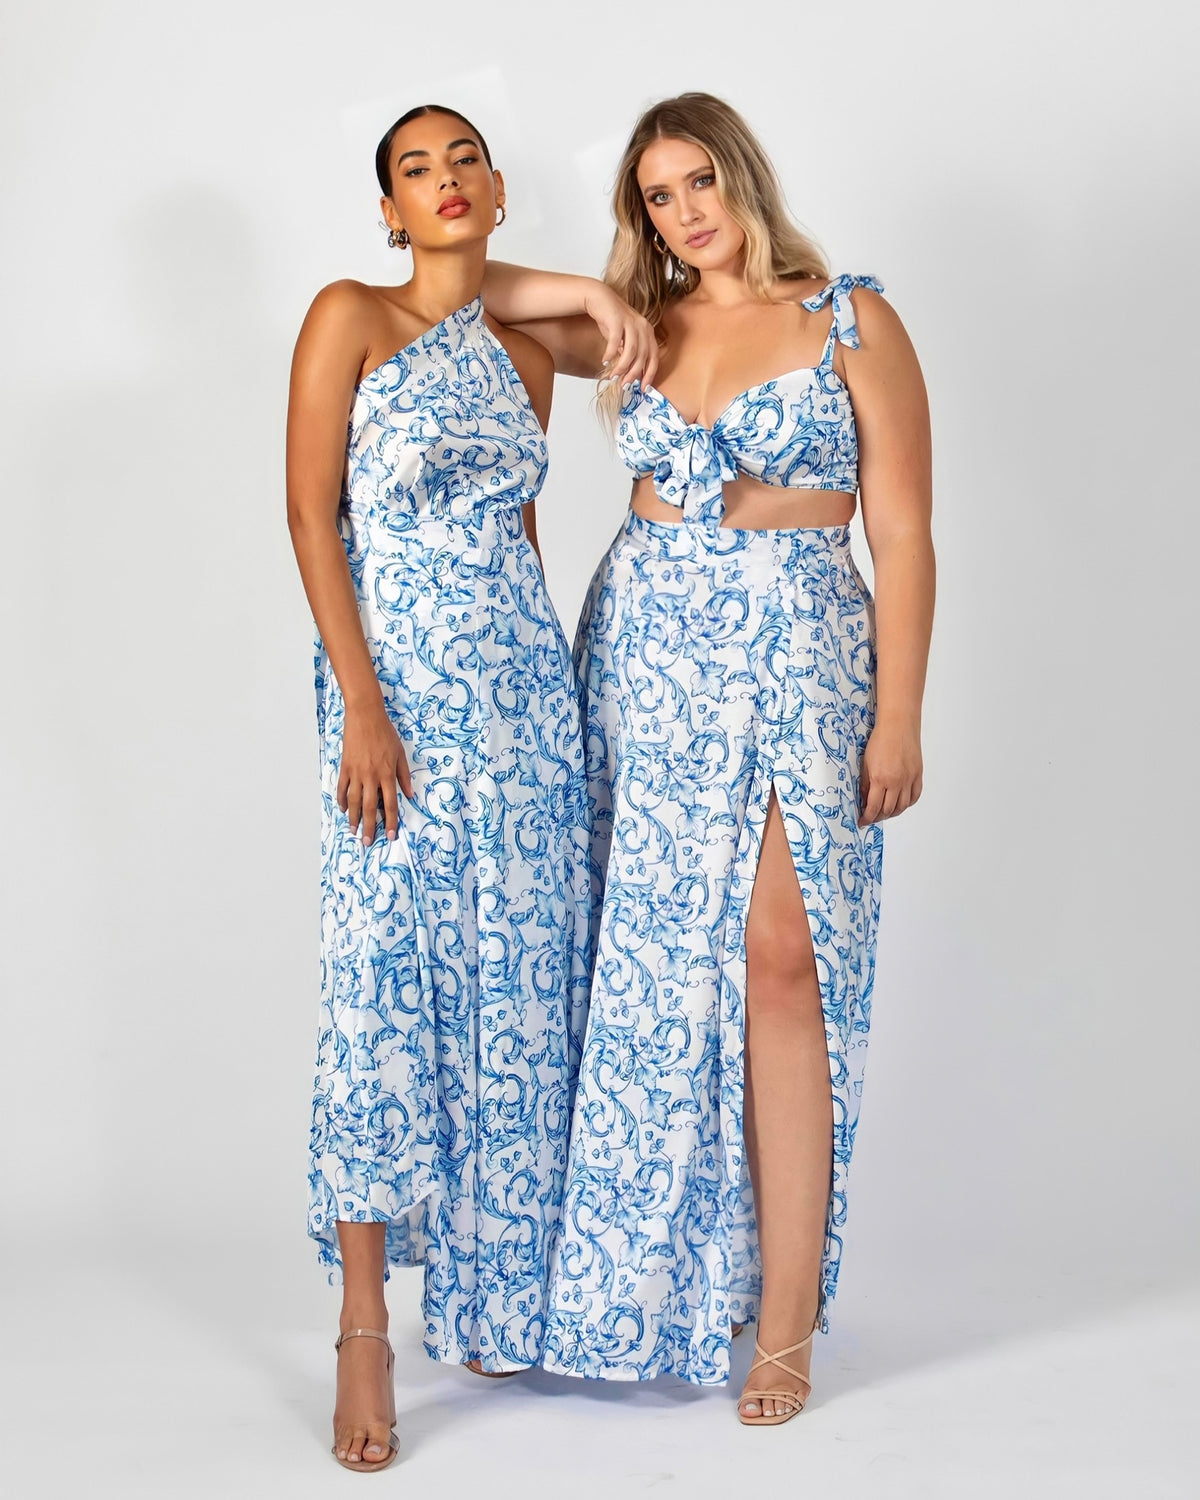 Floral Printed Resort Wear Outfits: Elevate Your Style in Paradise - Vesture